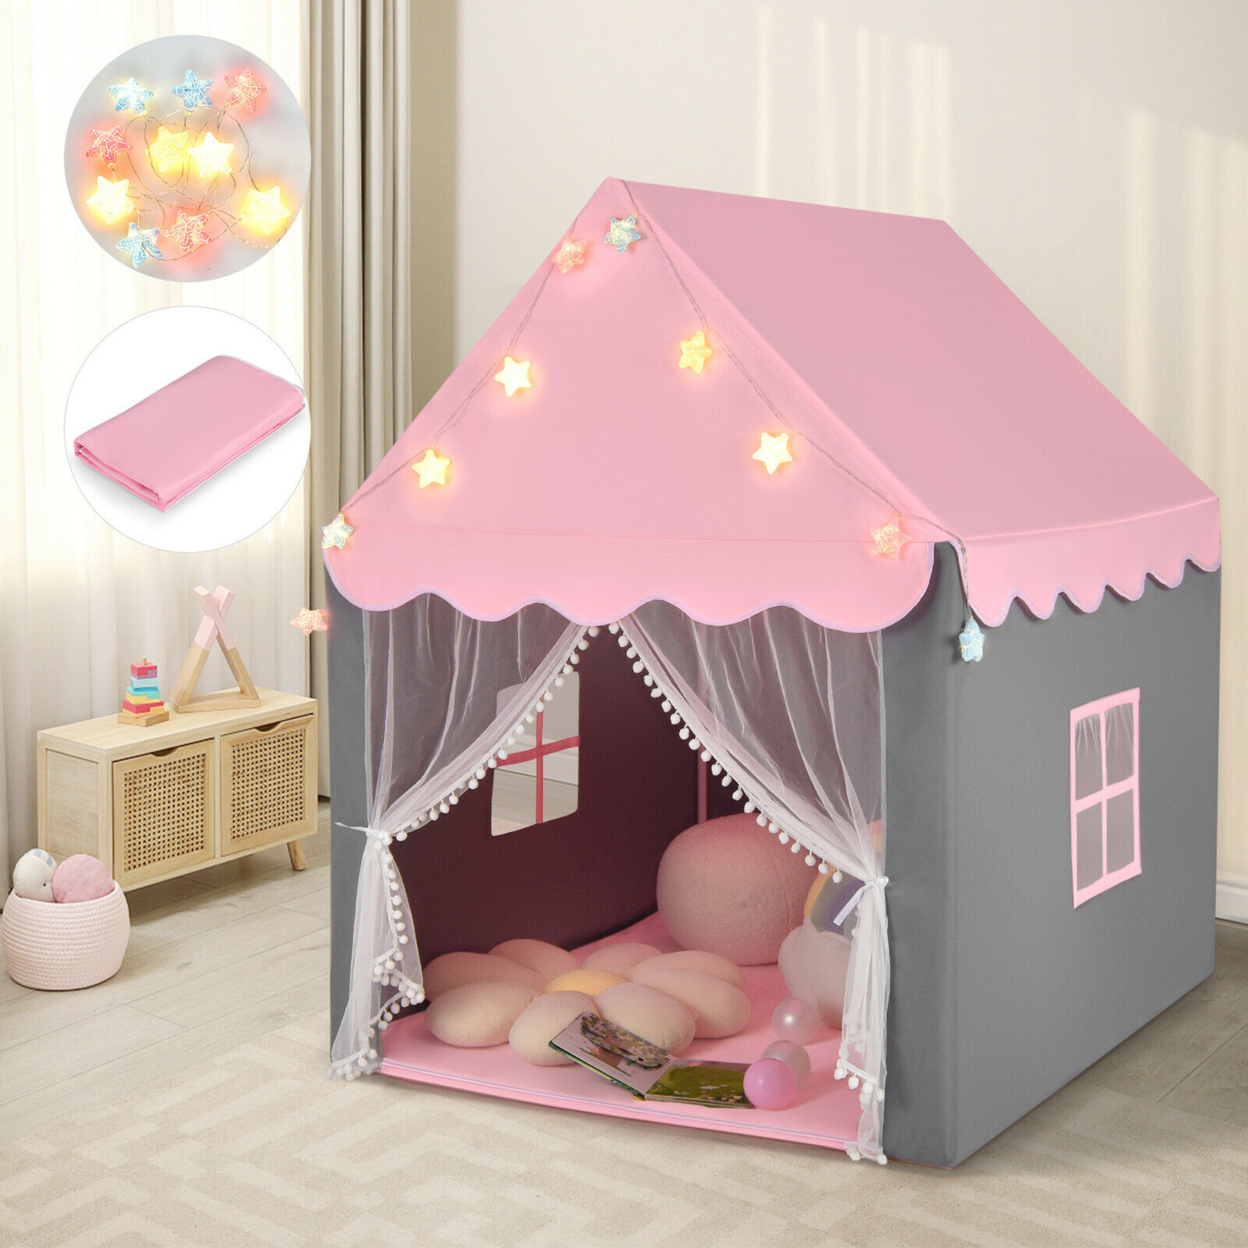 Kids Playhouse Tent Large Castle Fairy Tent Gift W/Star Lights Mat - Pink + Gray